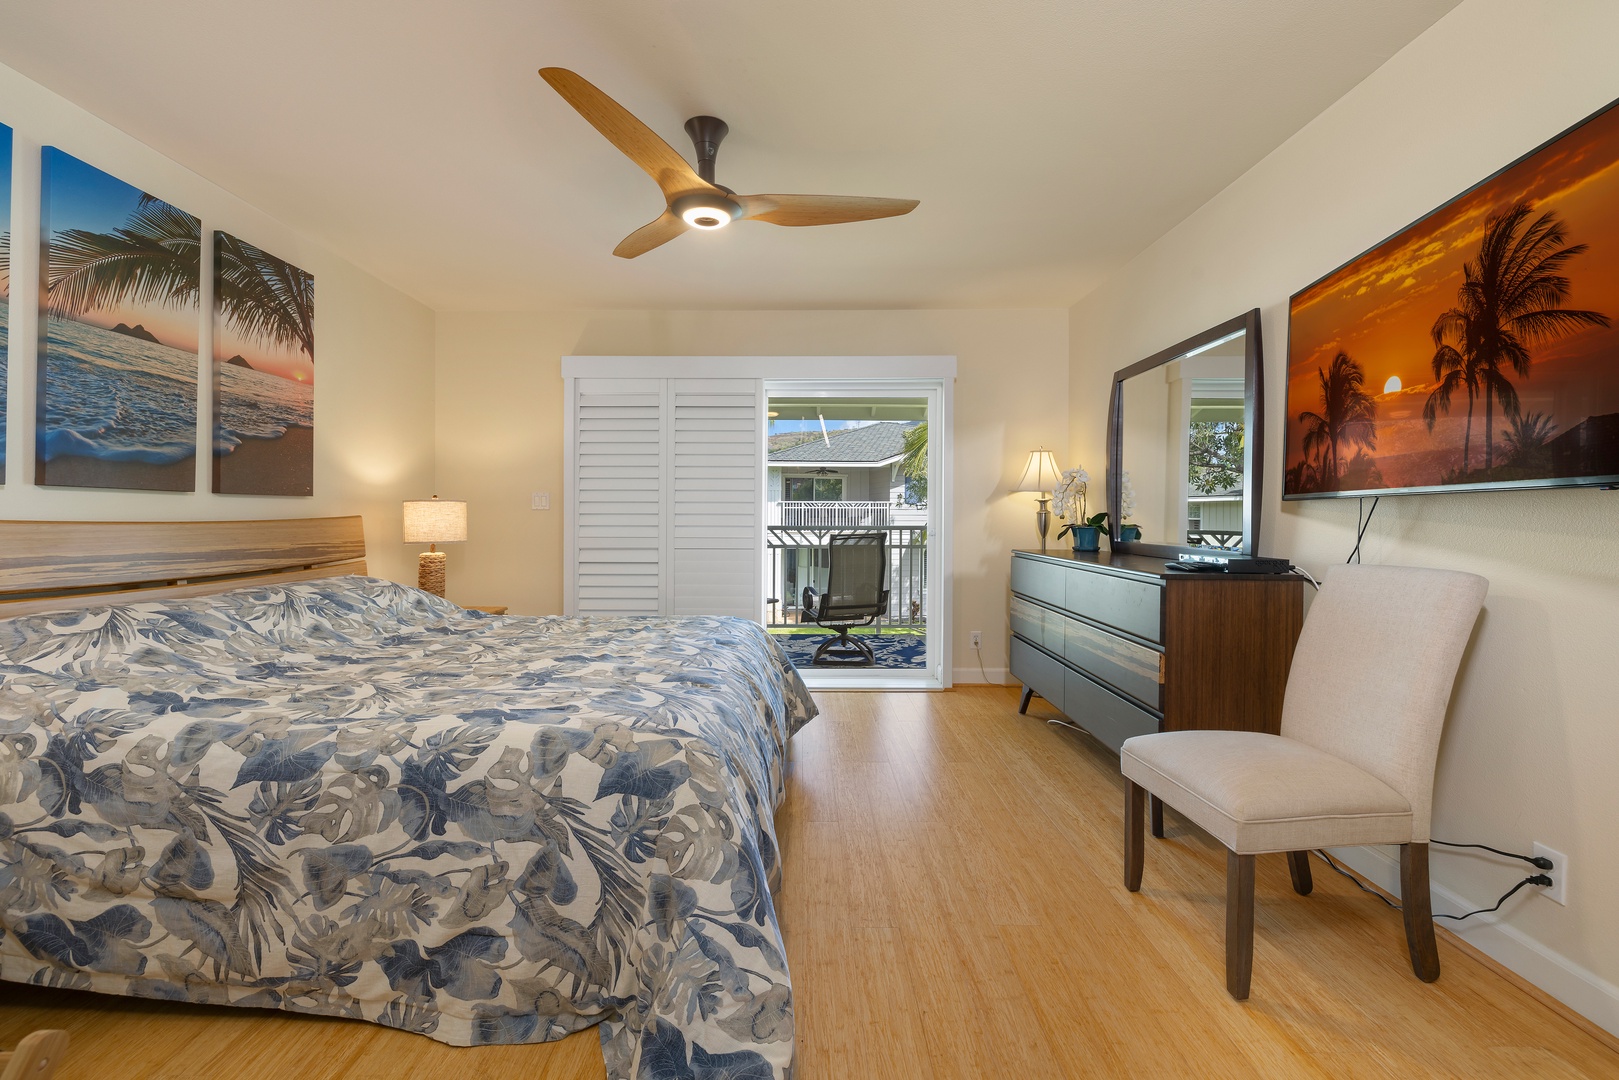 Kapolei Vacation Rentals, Ko Olina Kai 1083C - The upstairs primary guest bedroom with access to the lanai and ensuite bathroom and closet.